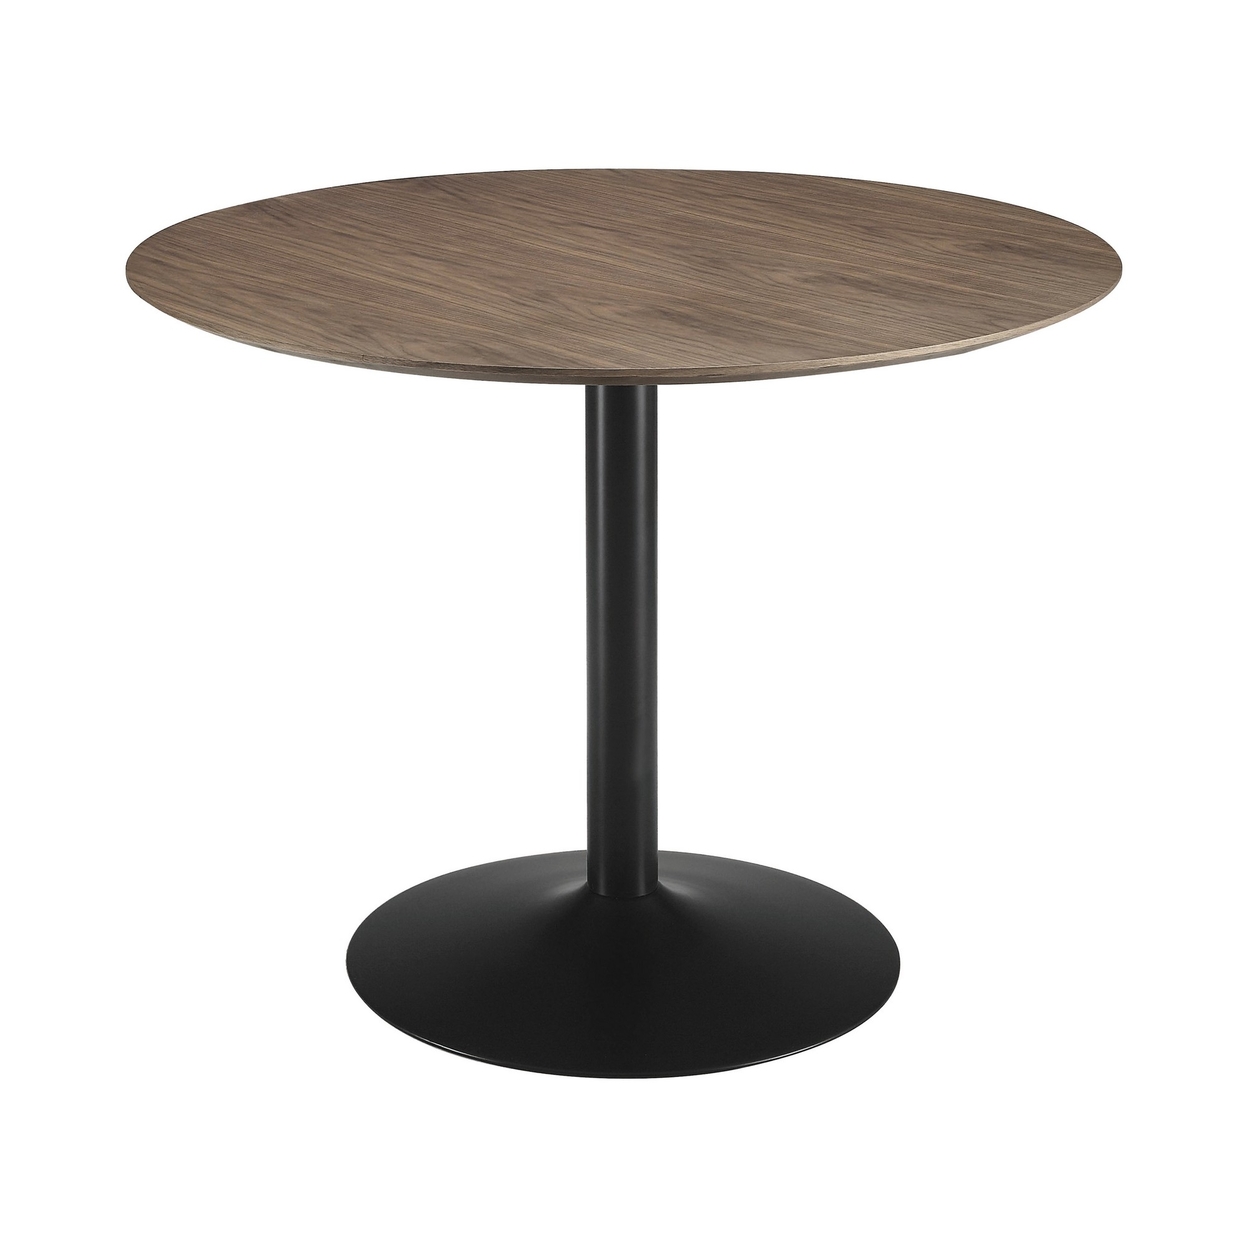 30 Inch Round Wooden Top Modern Dining Table, Black And Brown- Saltoro Sherpi